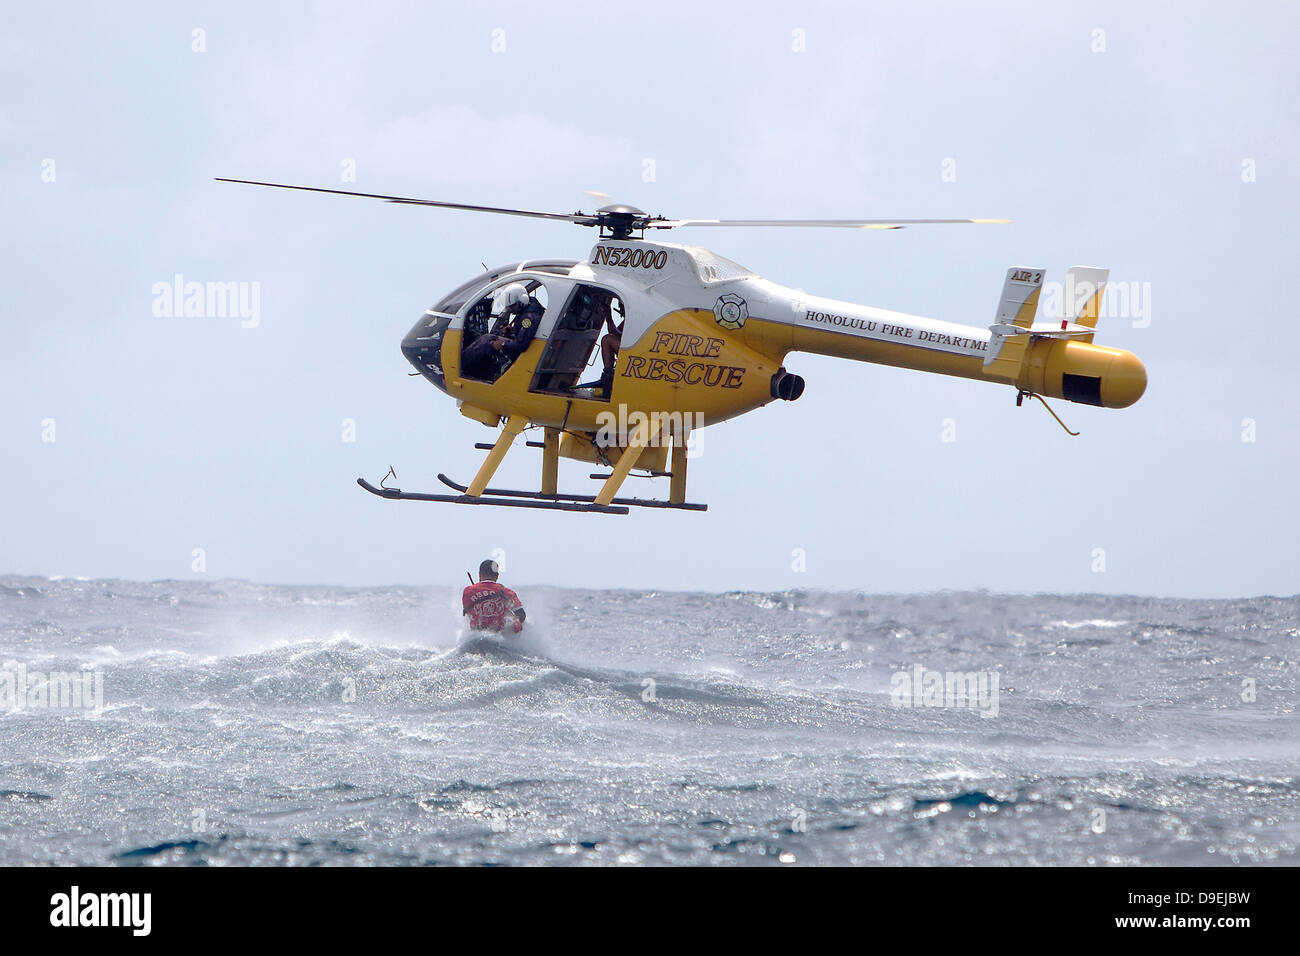 A Honolulu Fire Department rescue helicopter drops a rescue swimmer in respone to US Marine Corps pilots simulating a downed aircraft during annual mishap drill training for surviving a crash June 11, 2013 in Kaneohe Bay, Hawaii. Stock Photo